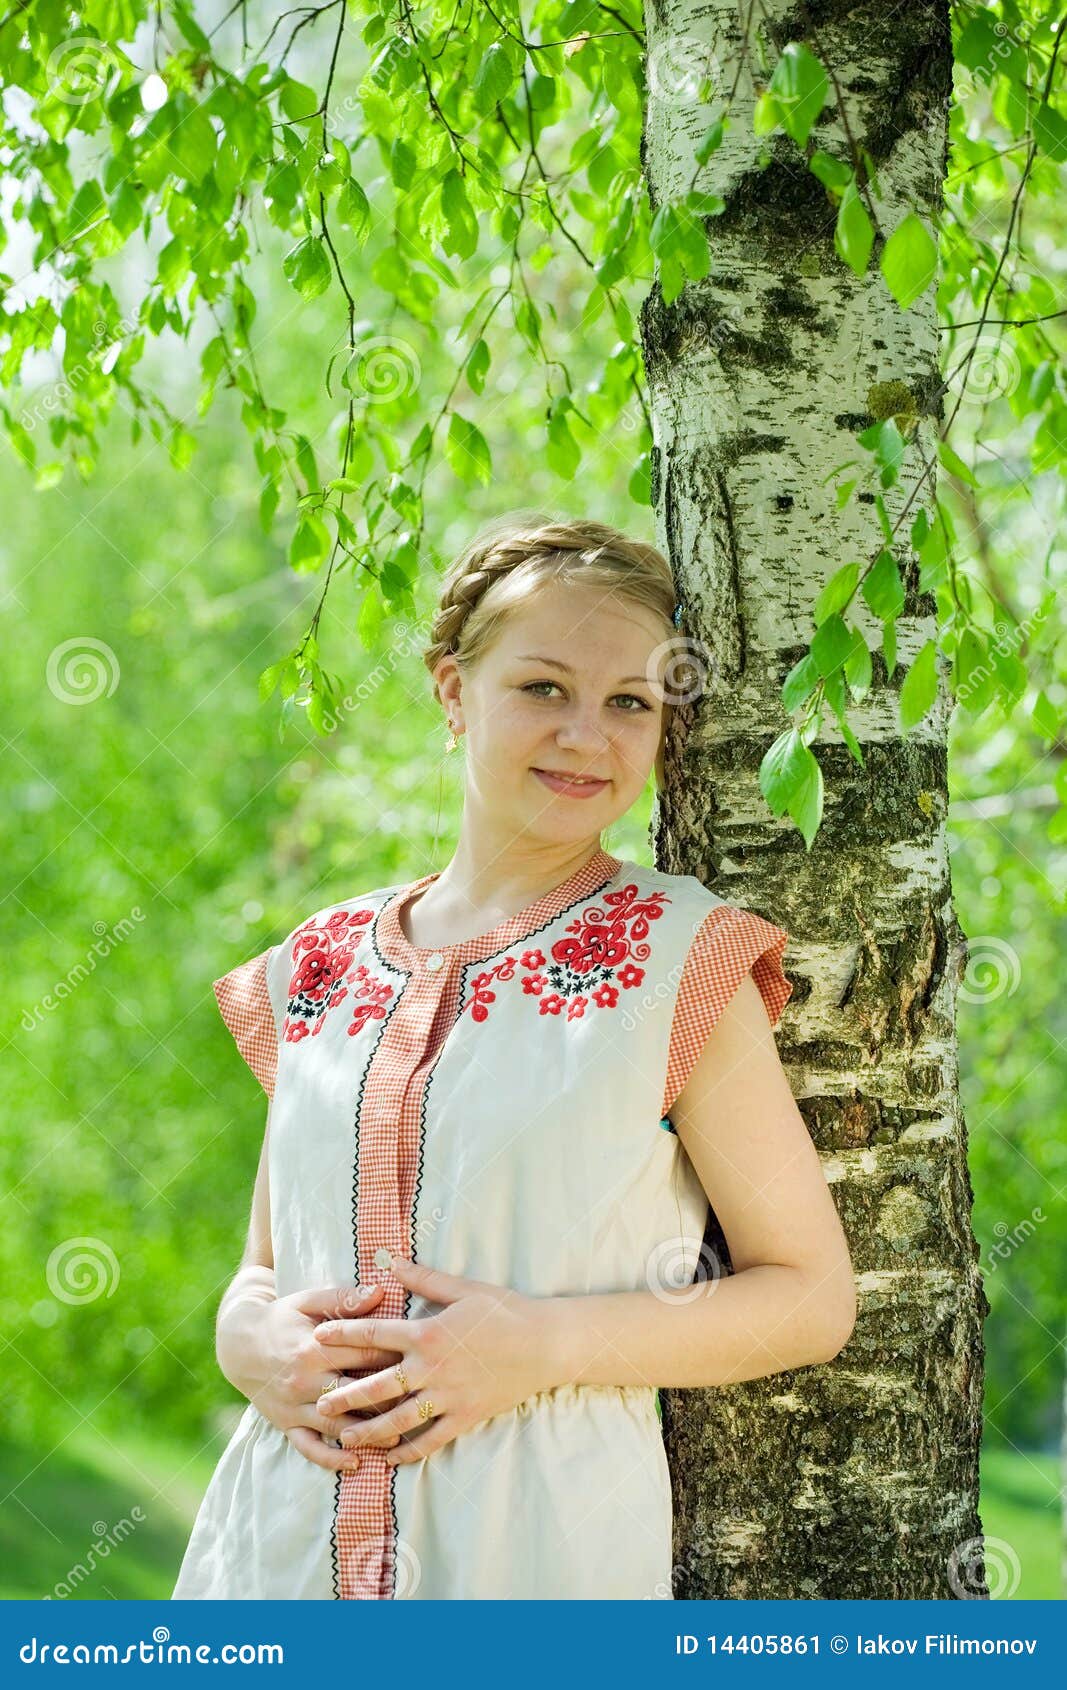 Girl in Traditional Clothes Stock Image - Image of meadow, leisure ...